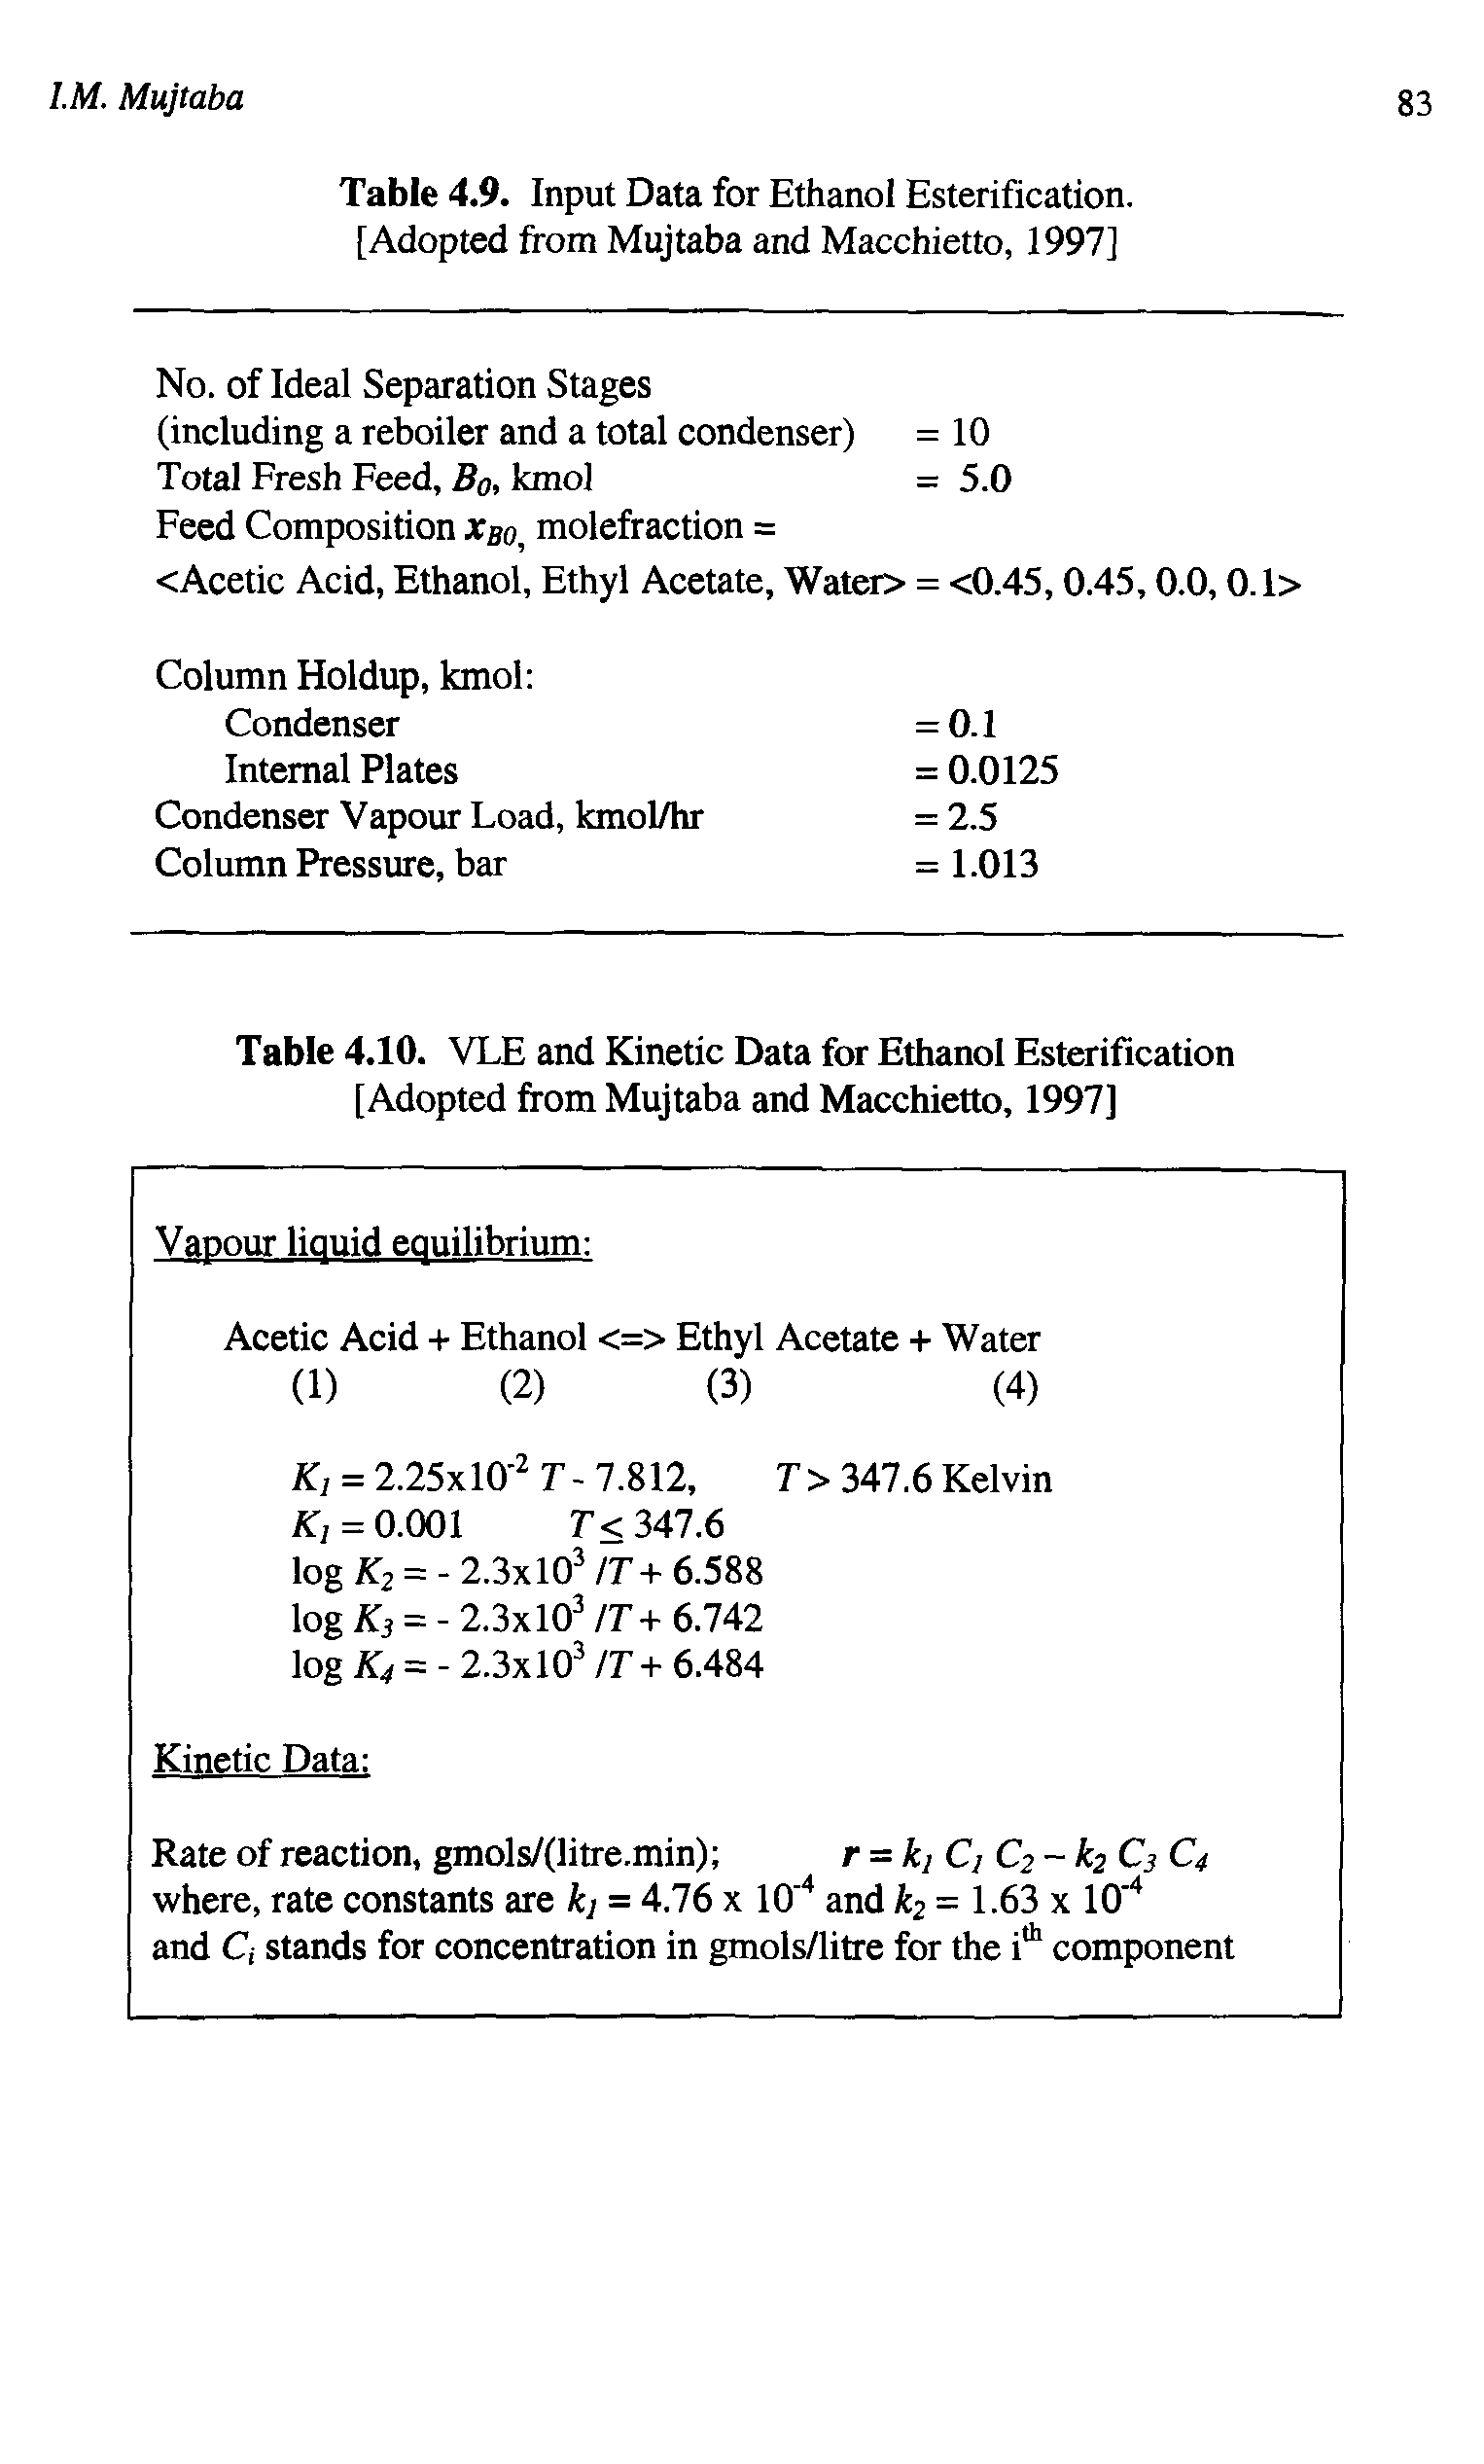 Table 4.9. Input Data for Ethanol Esterification. [Adopted from Mujtaba and Macchietto, 1997]...